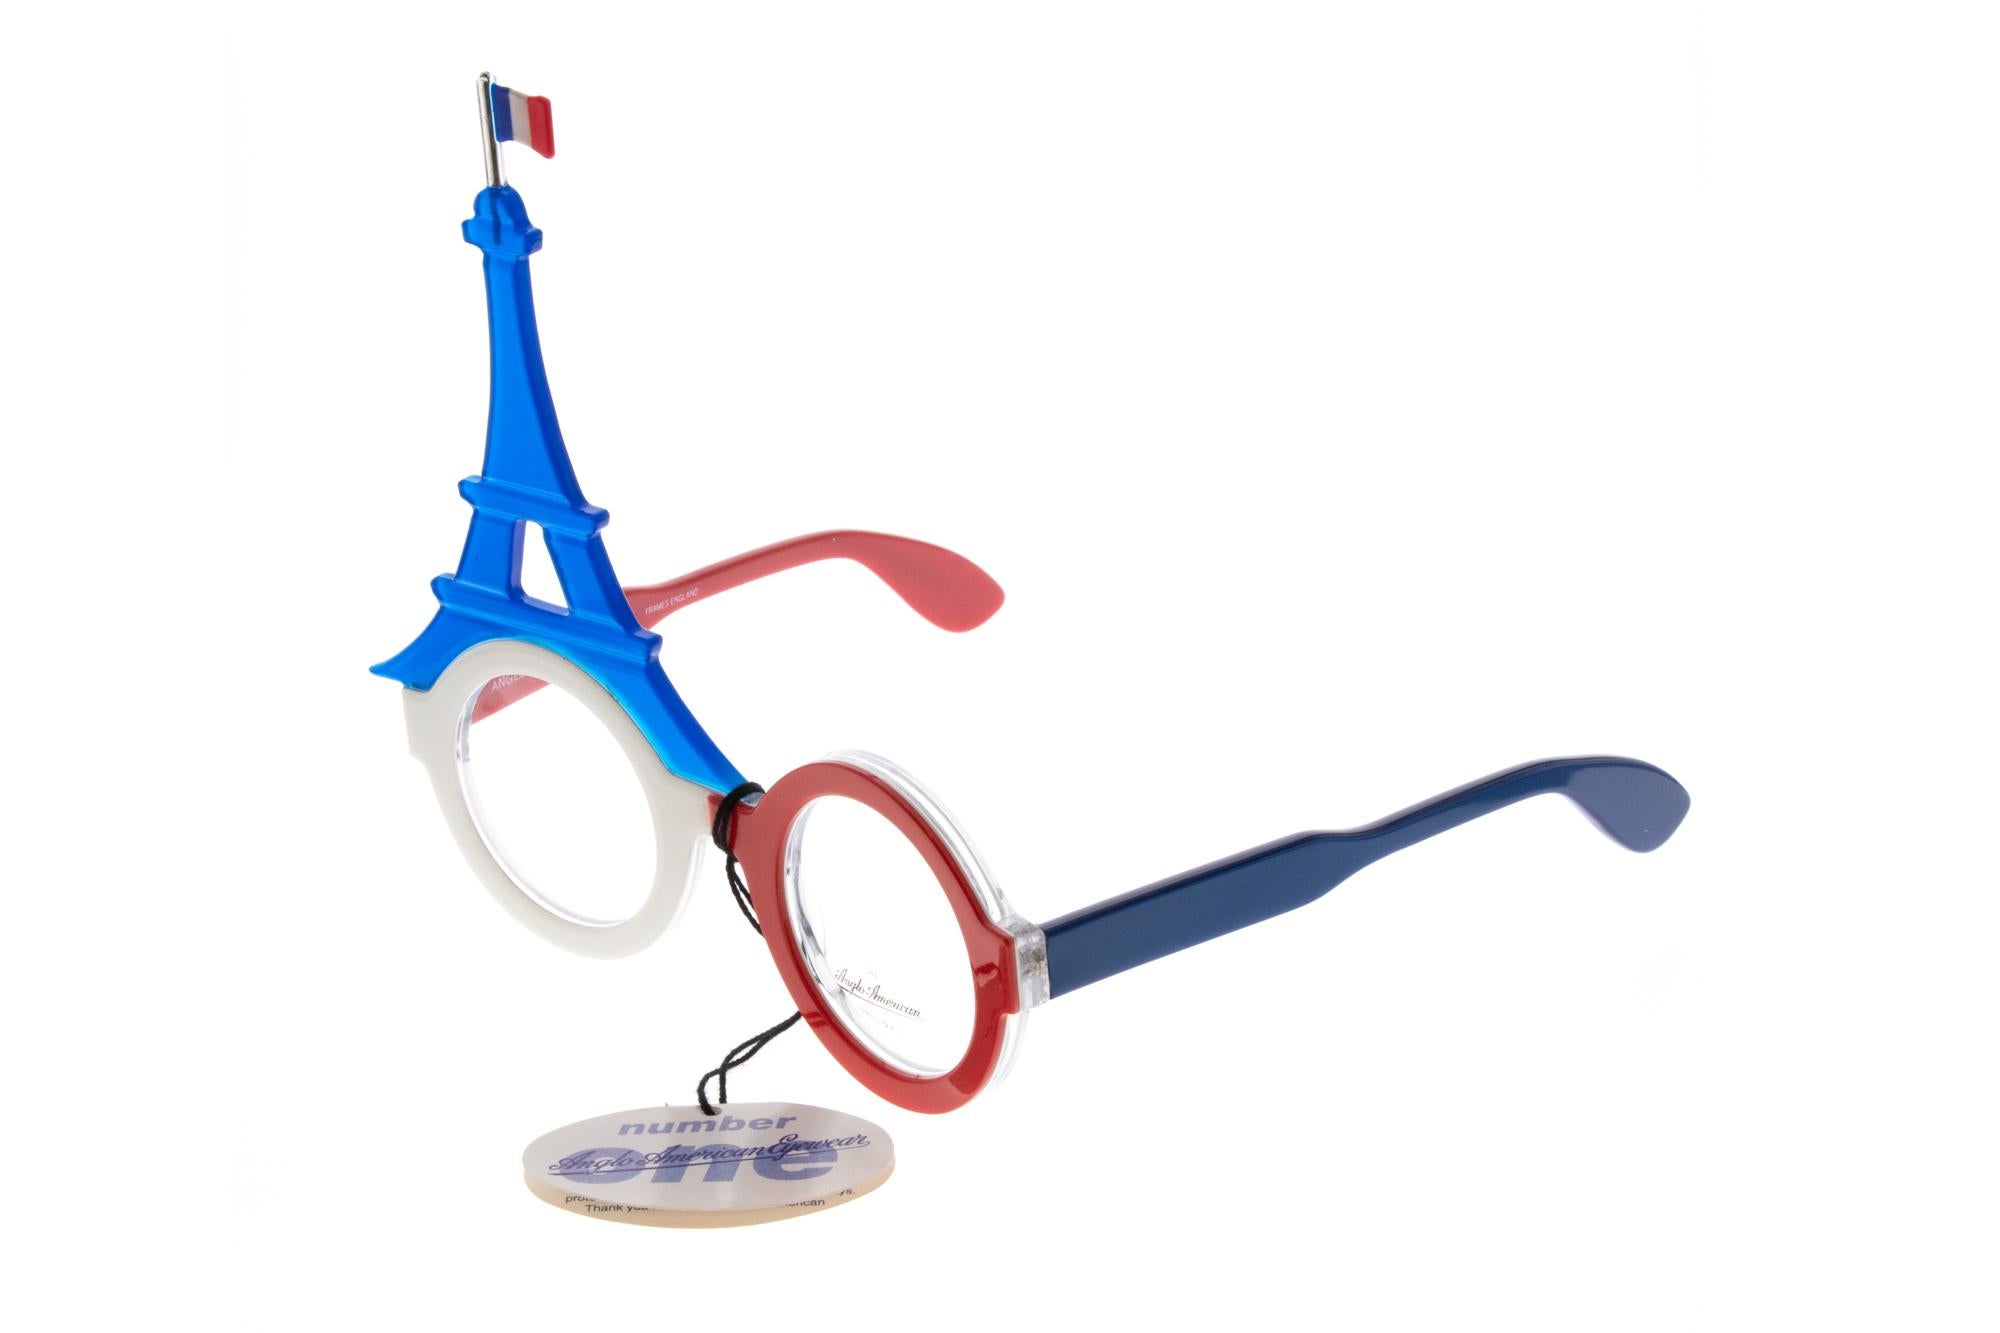 The model EIFFEL TOWER is made by Anglo American Eyewear. 
The company was voted best designers of Sunglasses and Spectacle frames in 1993. 
All glasses are hand crafted from the best materials. These high quality acetate frames are mode from a